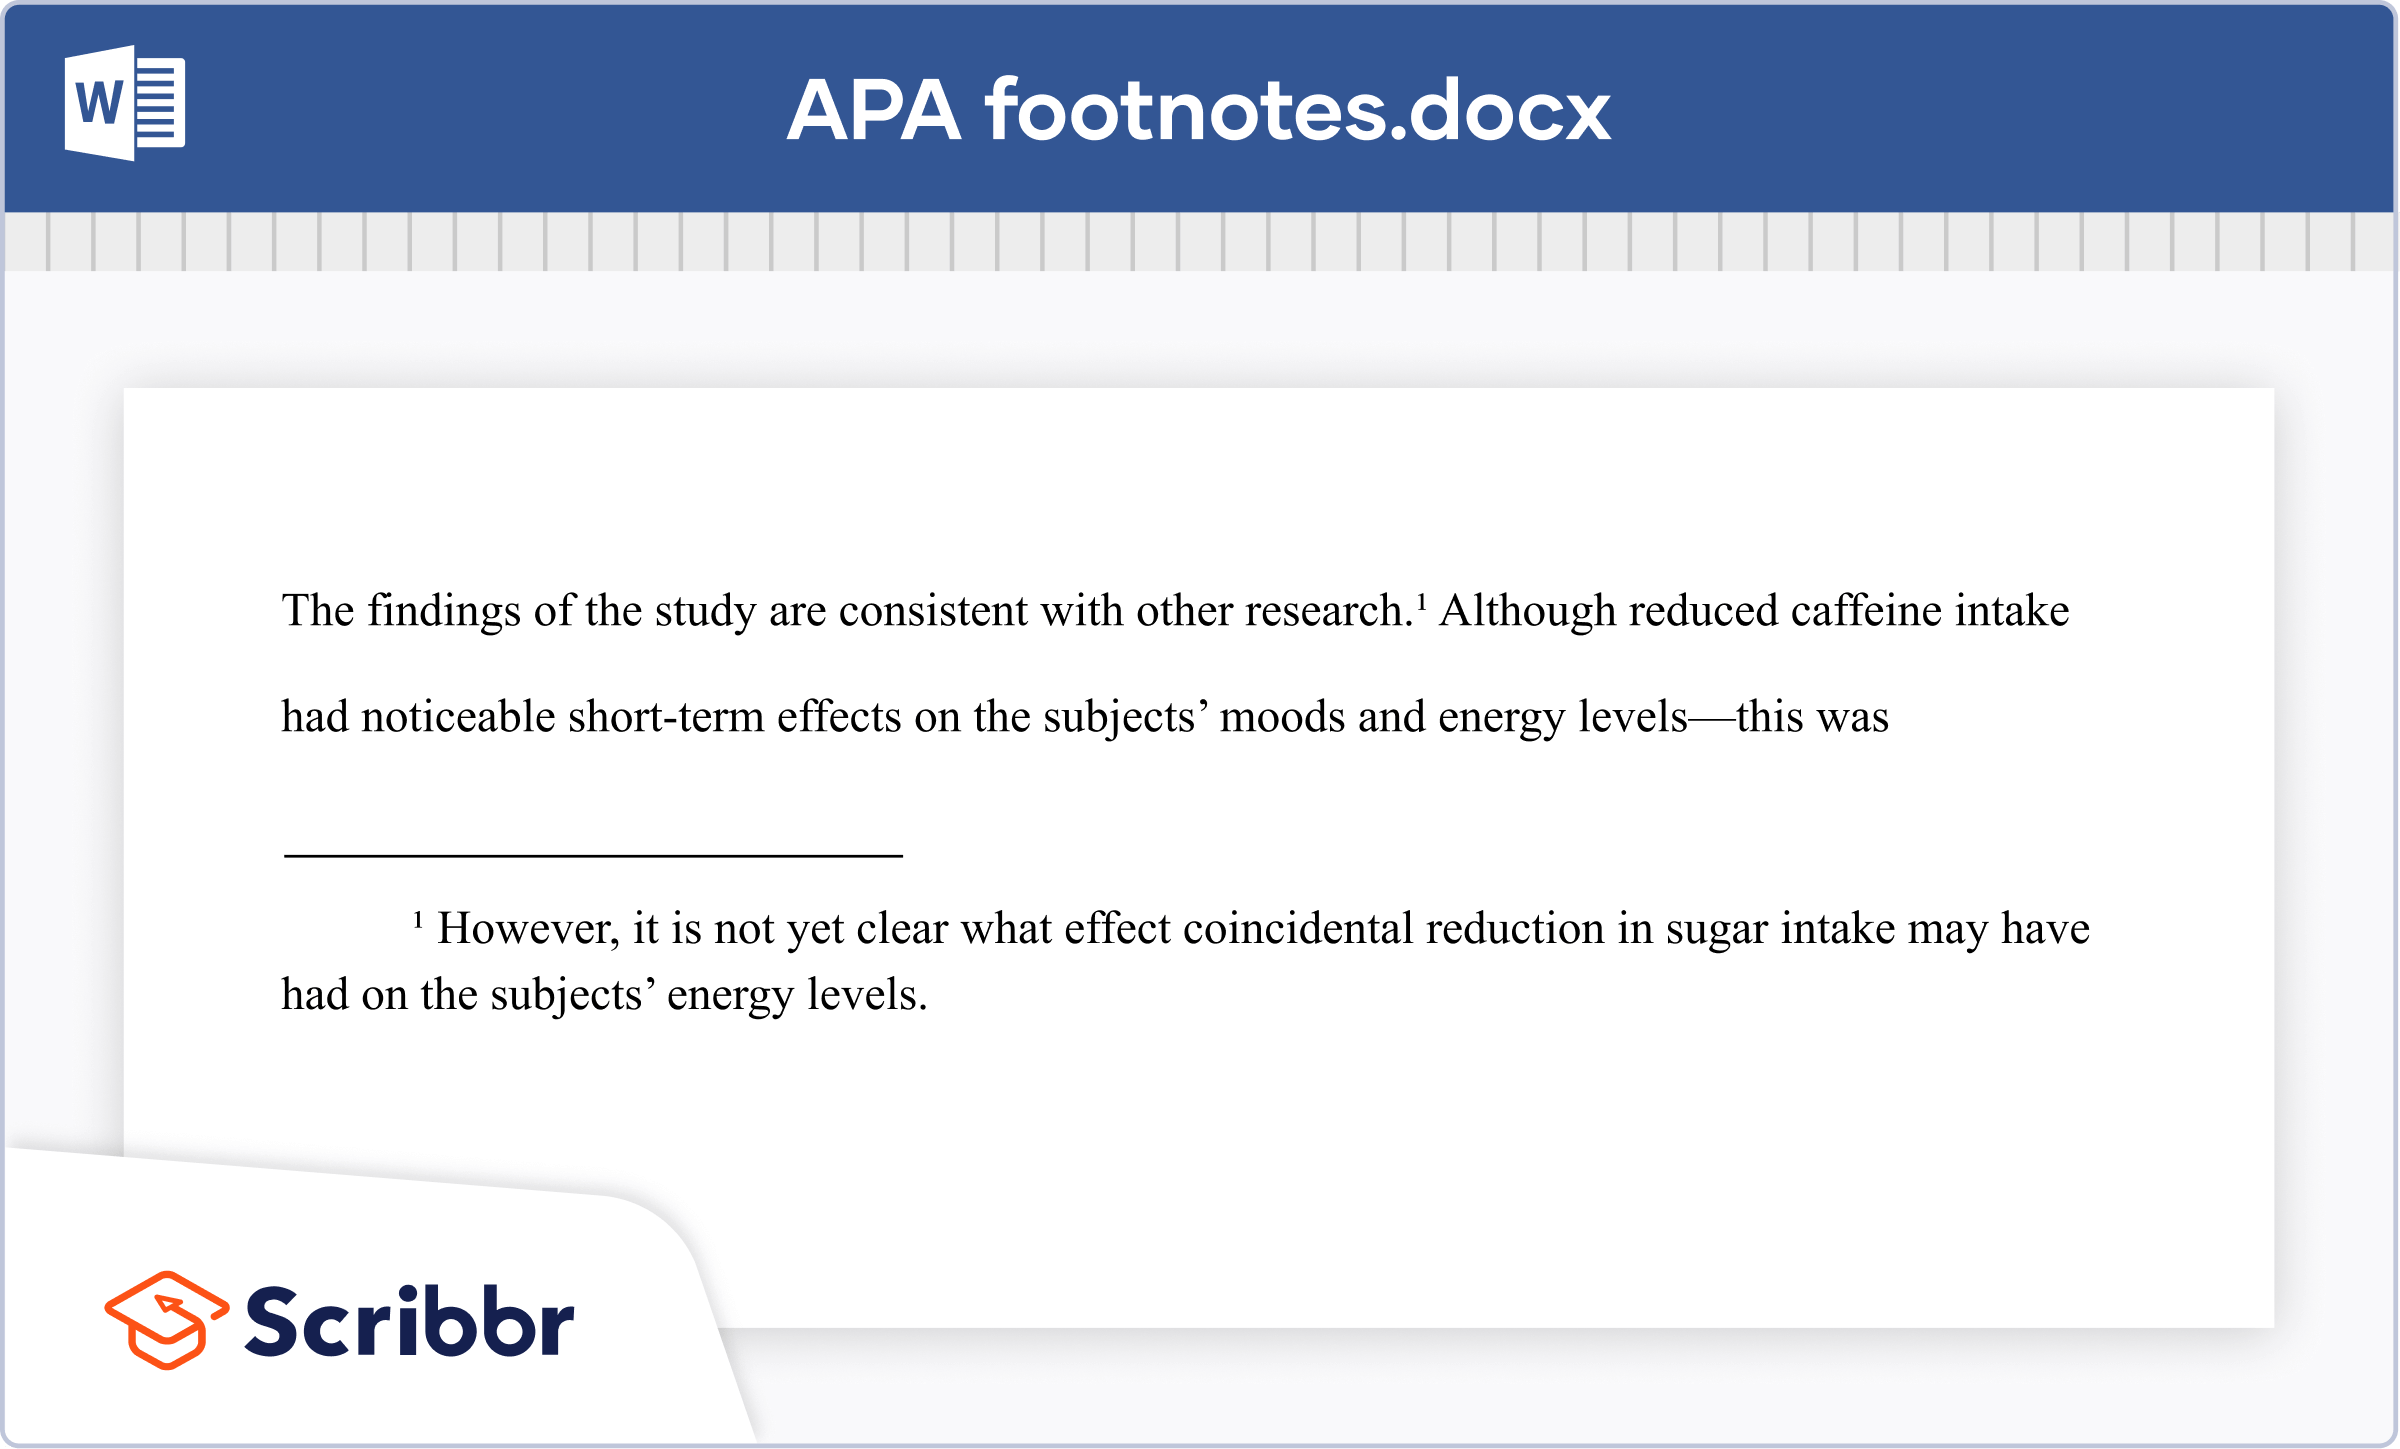 example of apa reference page for books